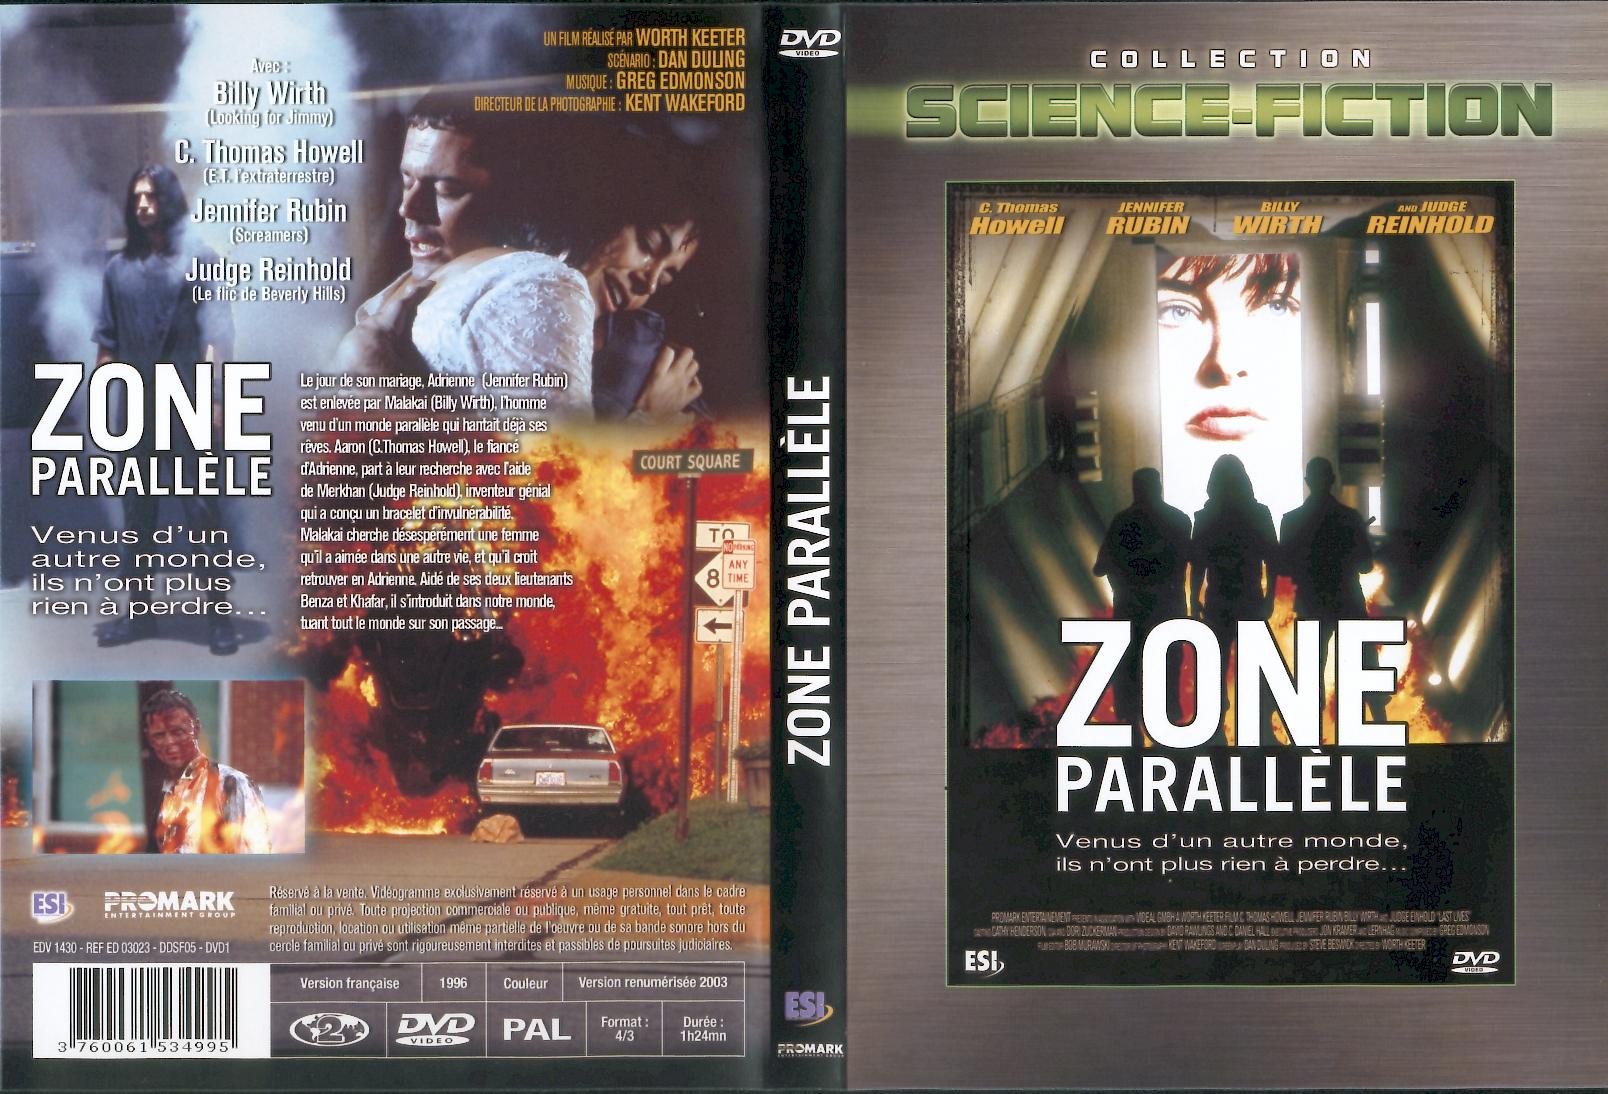 Jaquette DVD Zone parallle